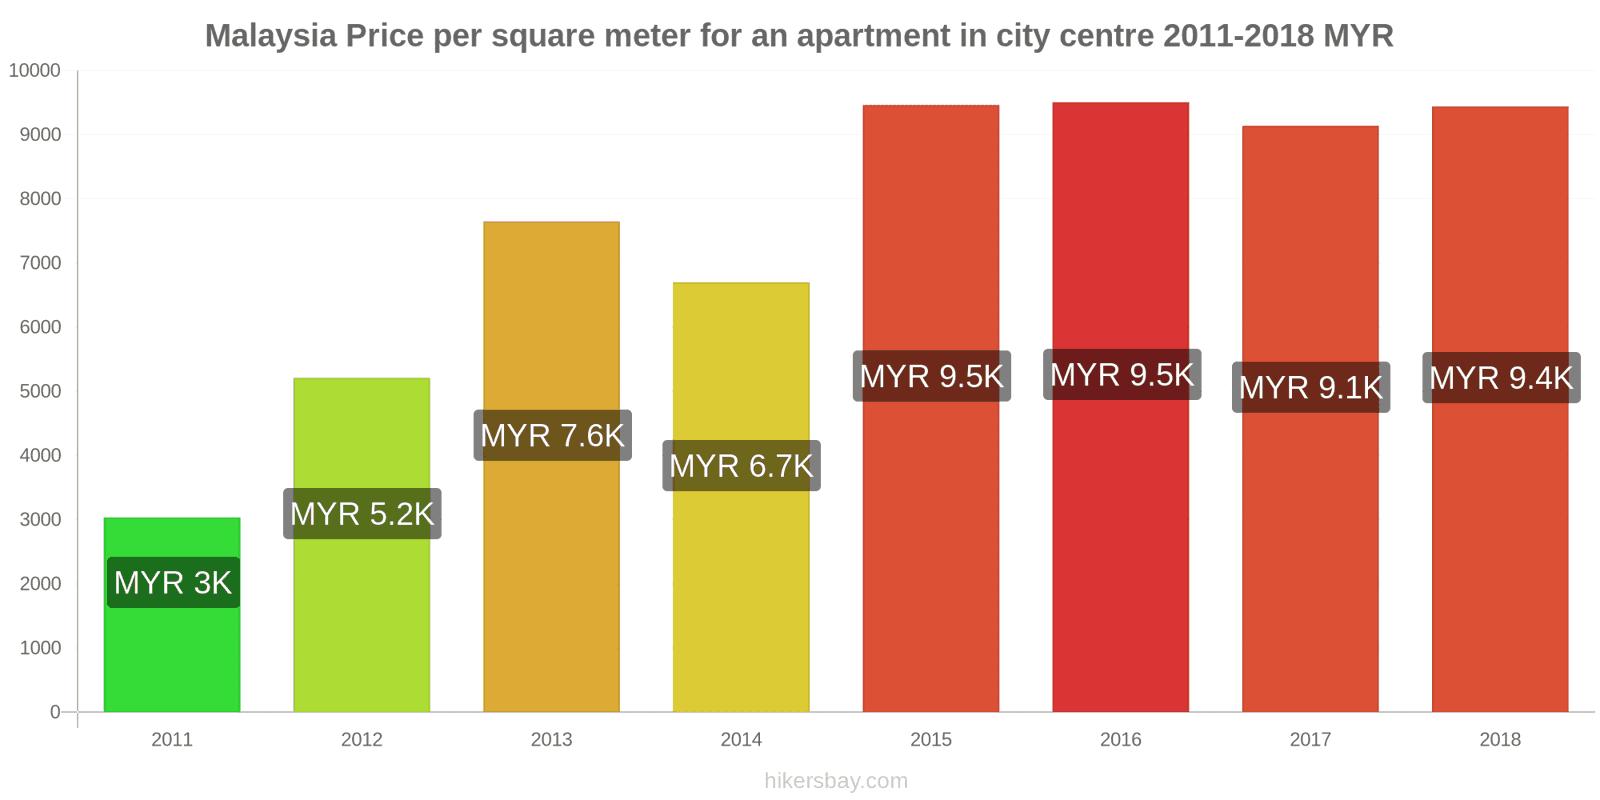 Malaysia price changes Price per square meter for an apartment in the city center hikersbay.com